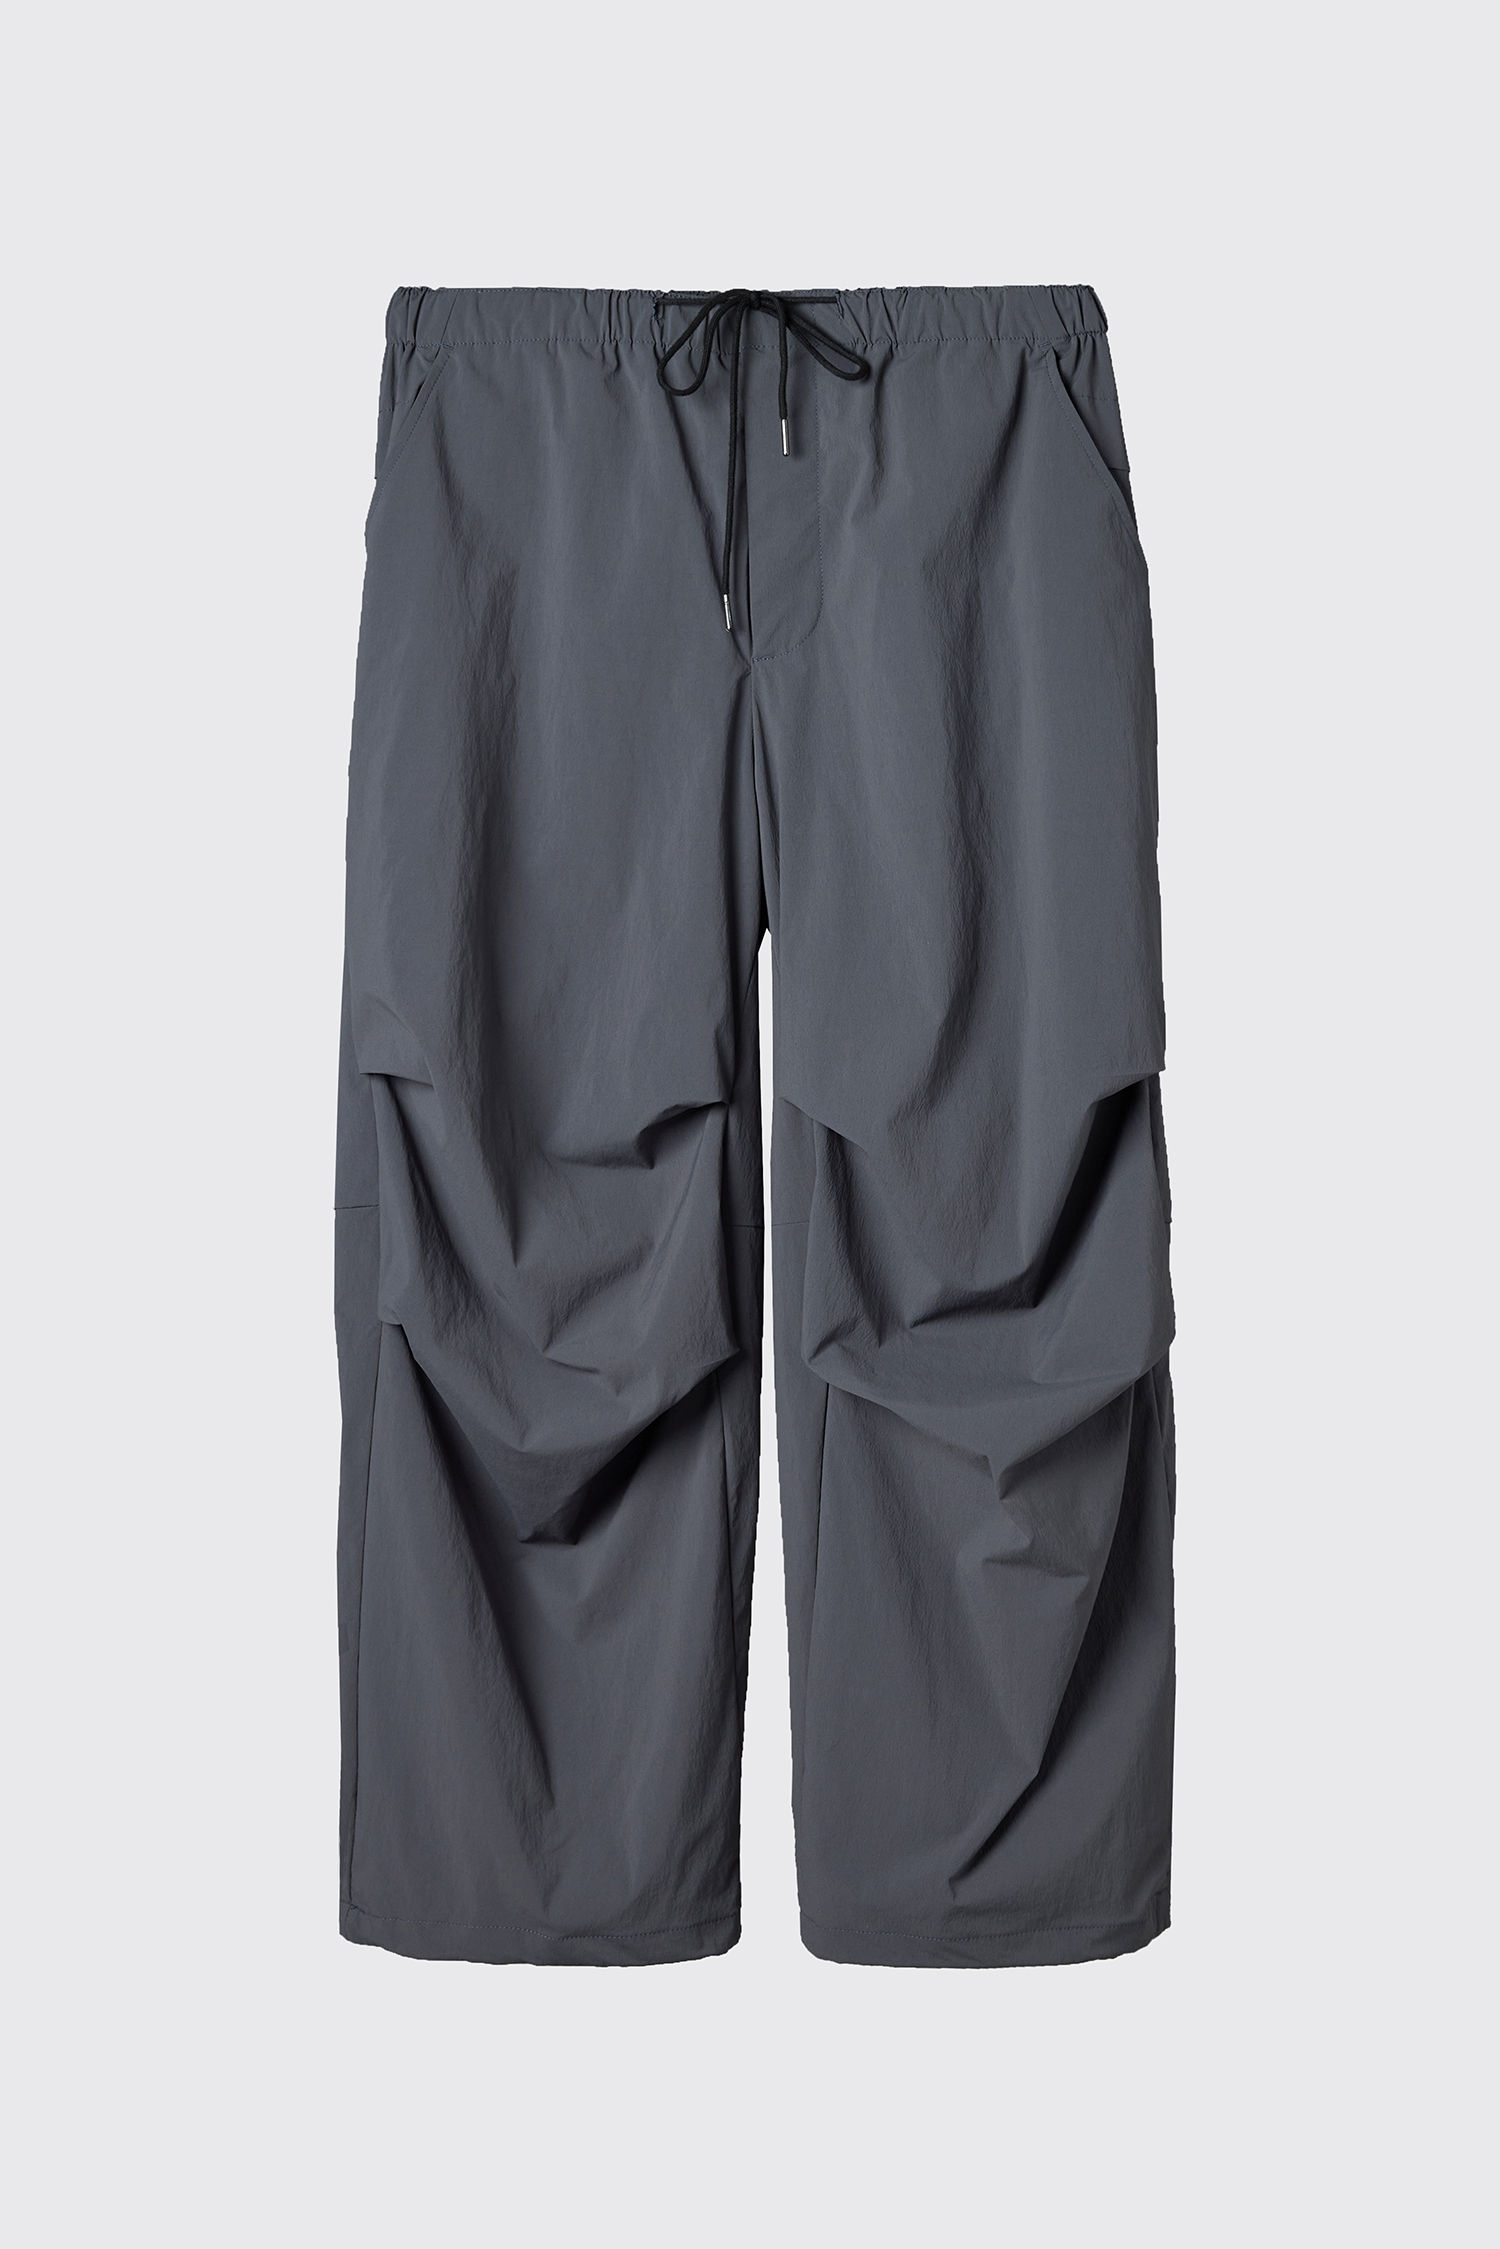 Snow Over Pants V2(Lining) Charcoal (Restock)